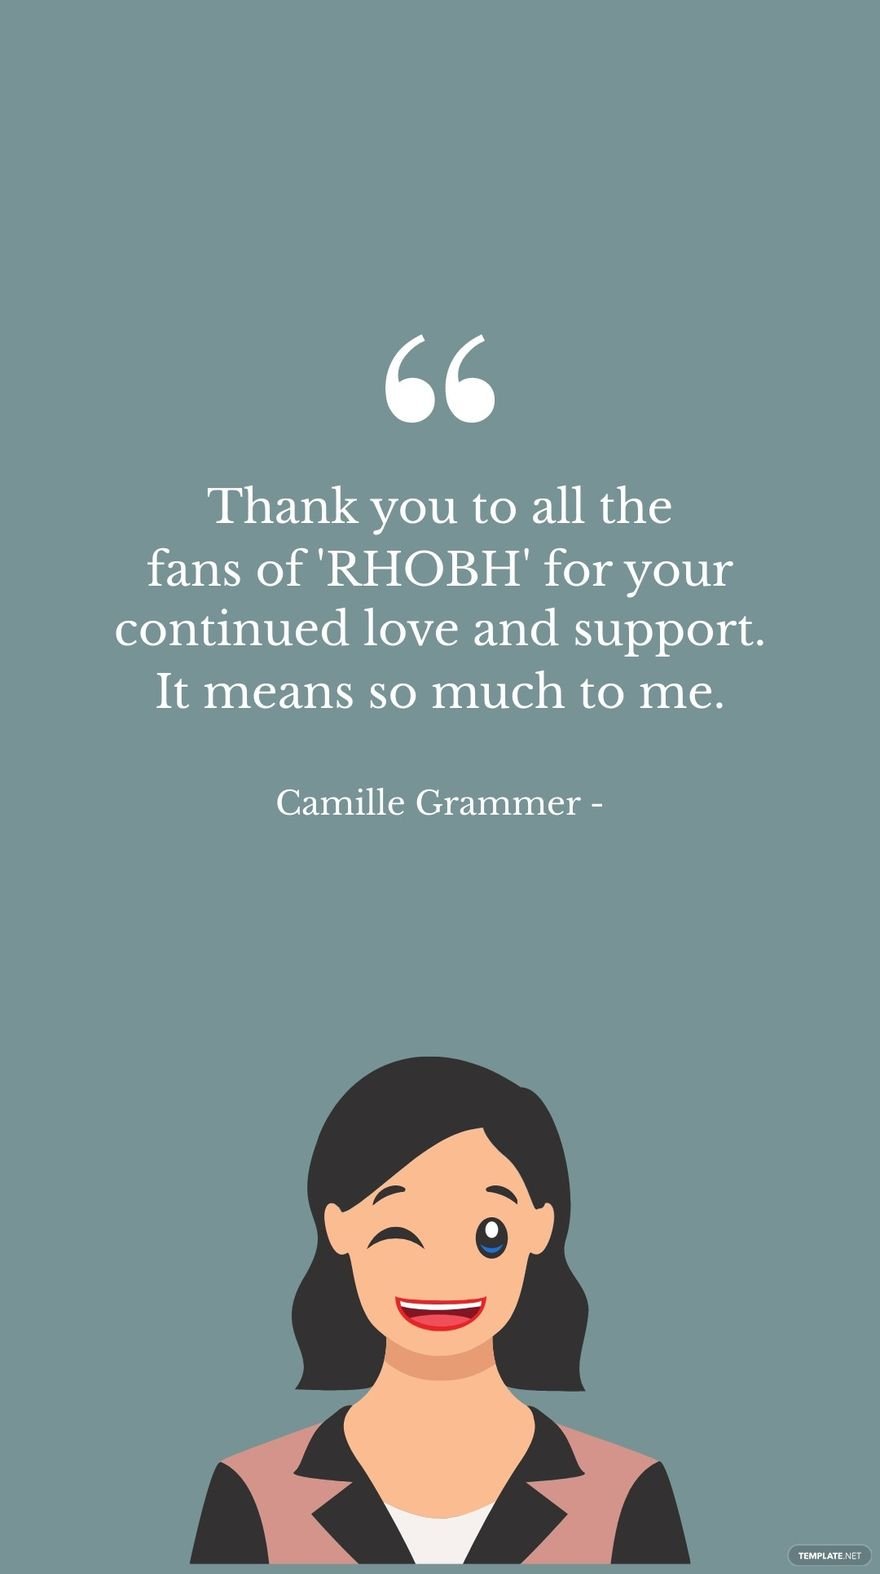 Camille Grammer - Thank you to all the fans of 'RHOBH' for your continued love and support. It means so much to me. in JPG